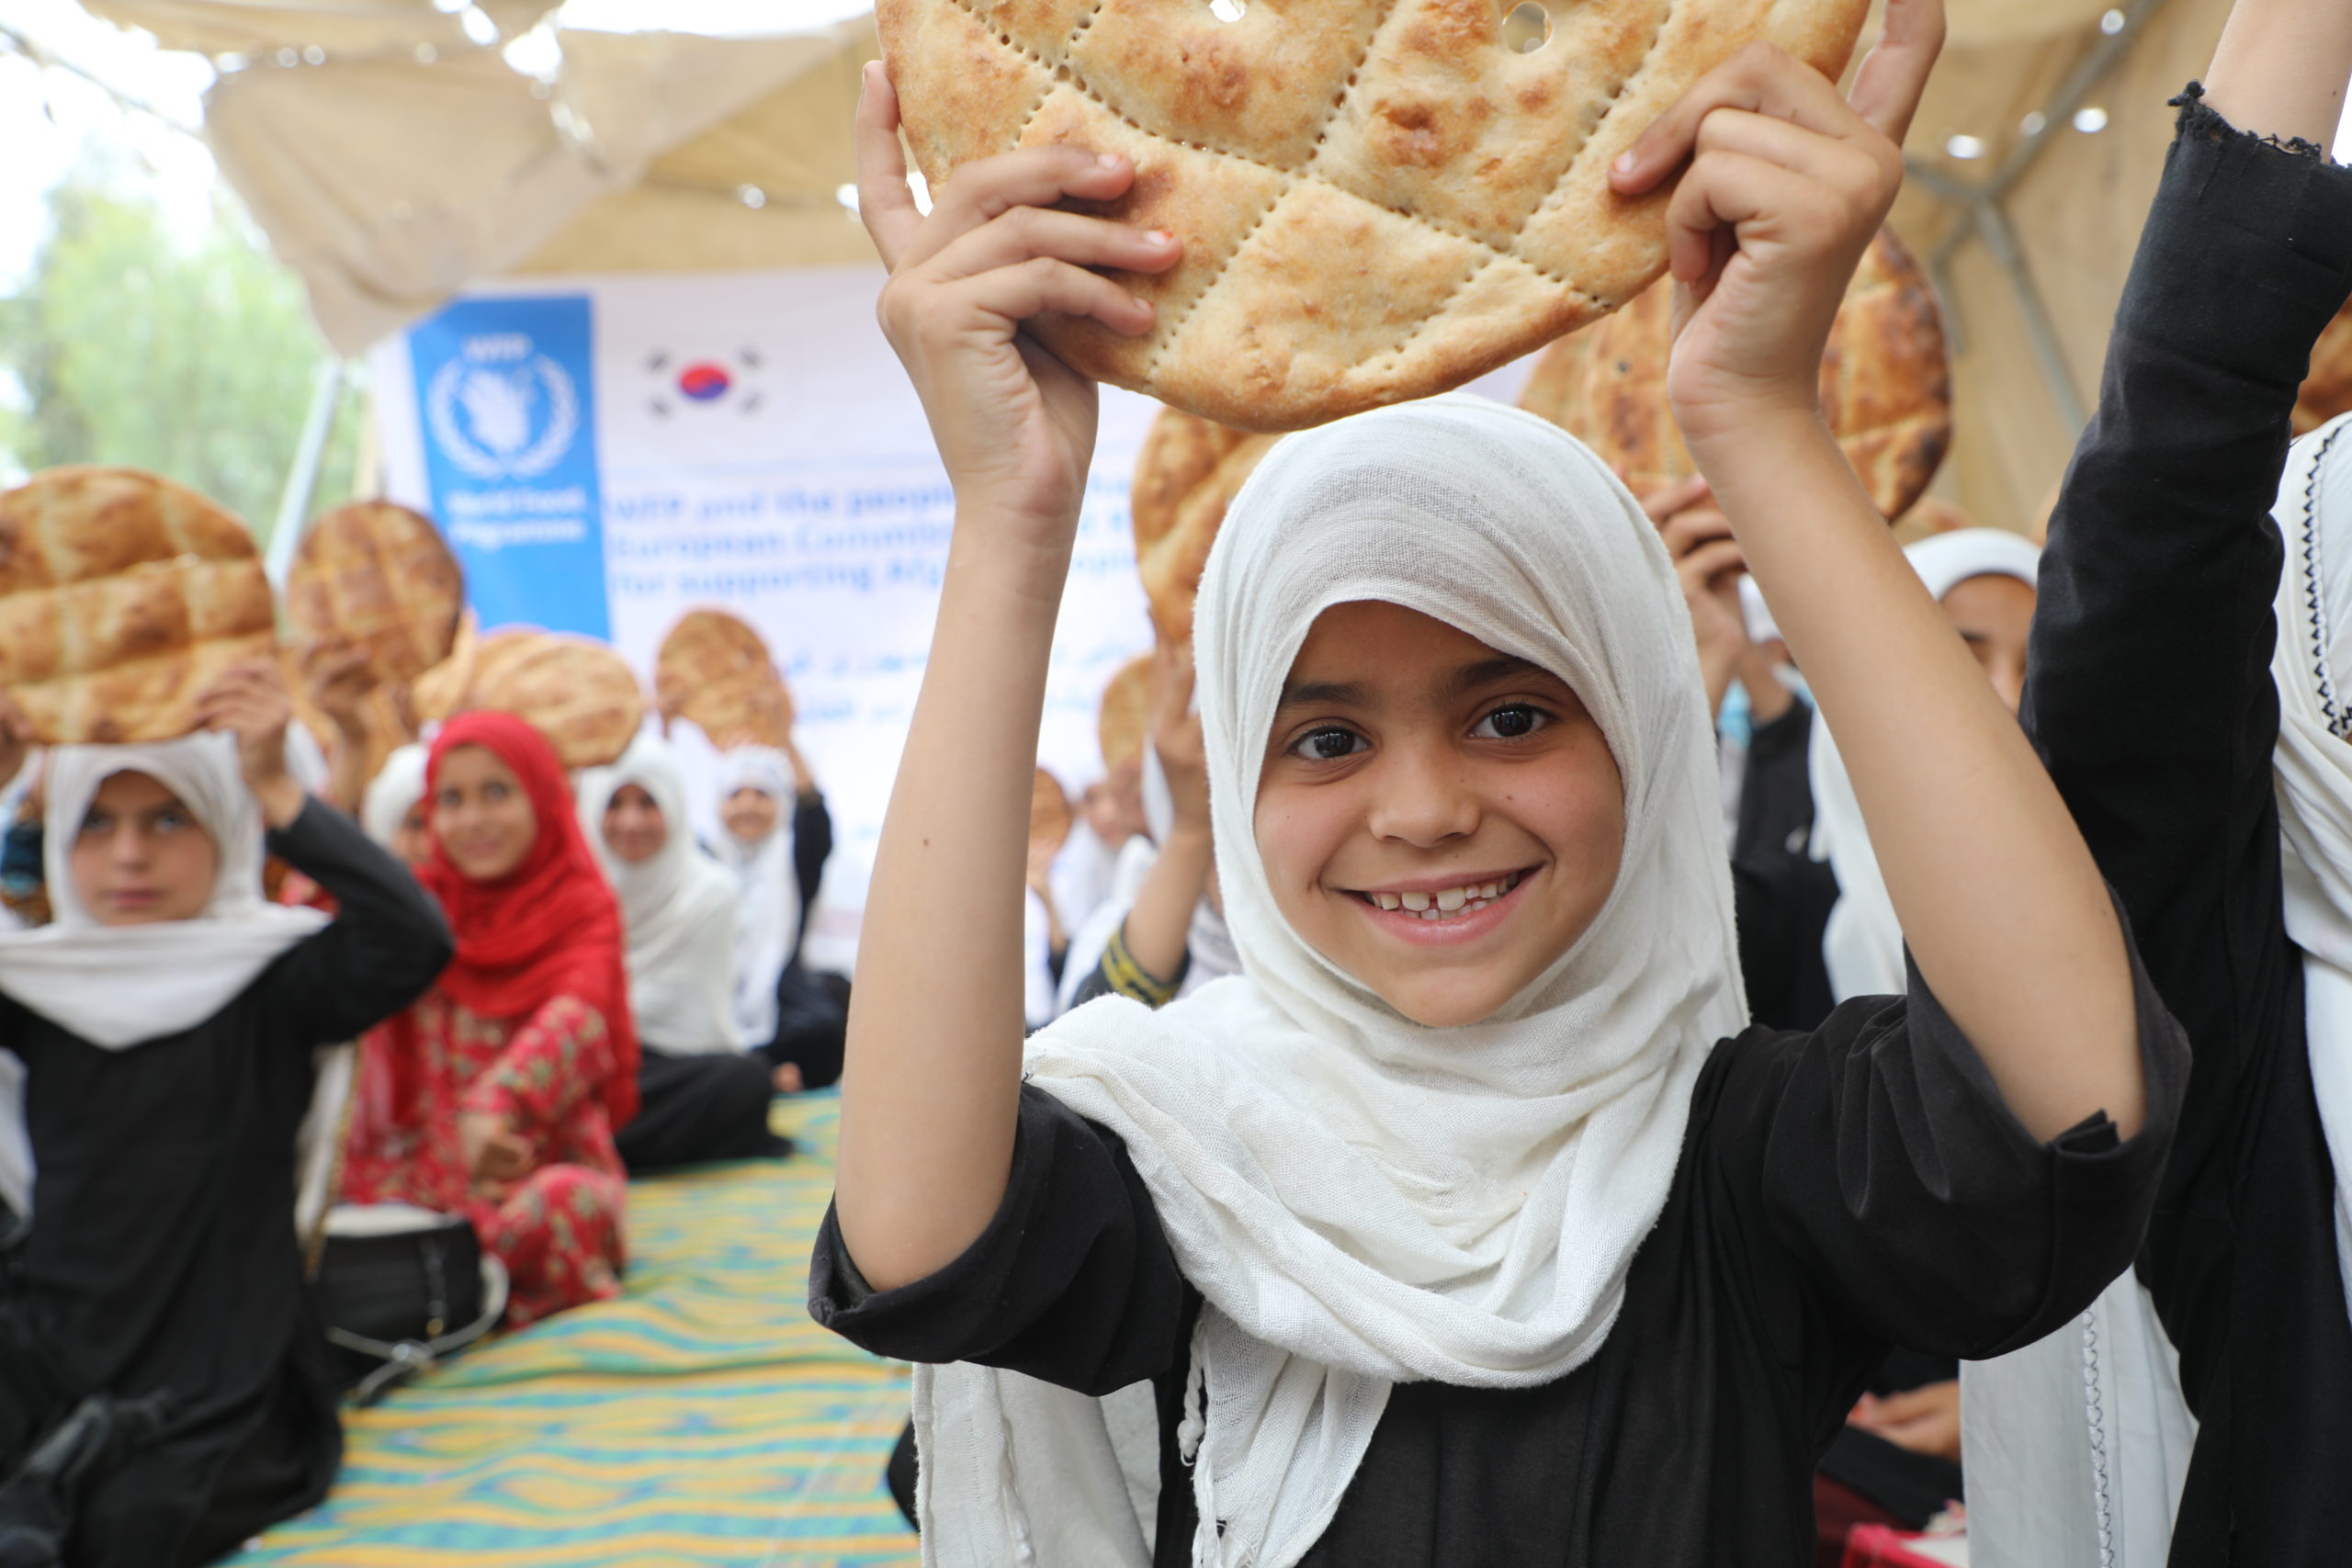 WFP is working with farmers and local bakeries to target primary schoolchildren with nutritious Bread+